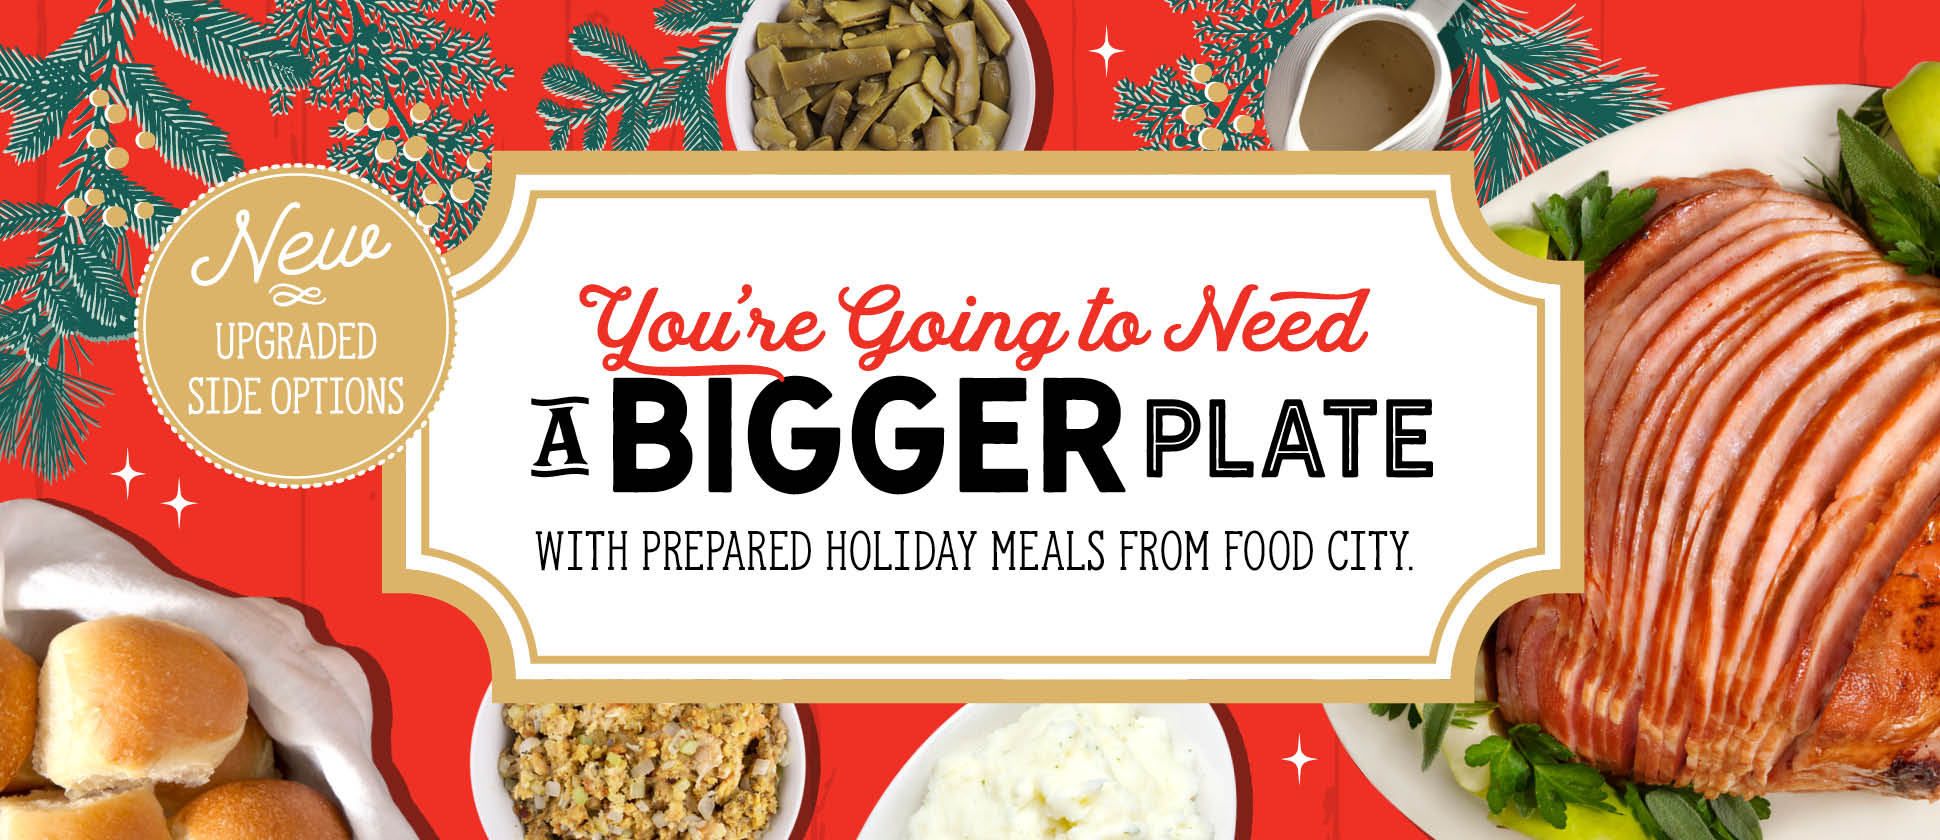 This year, step out of the kitchen and leave the cooking to us. At Food City, we offer a wide assortment of fully prepared, delicious holiday meals that are ready for your holiday table.